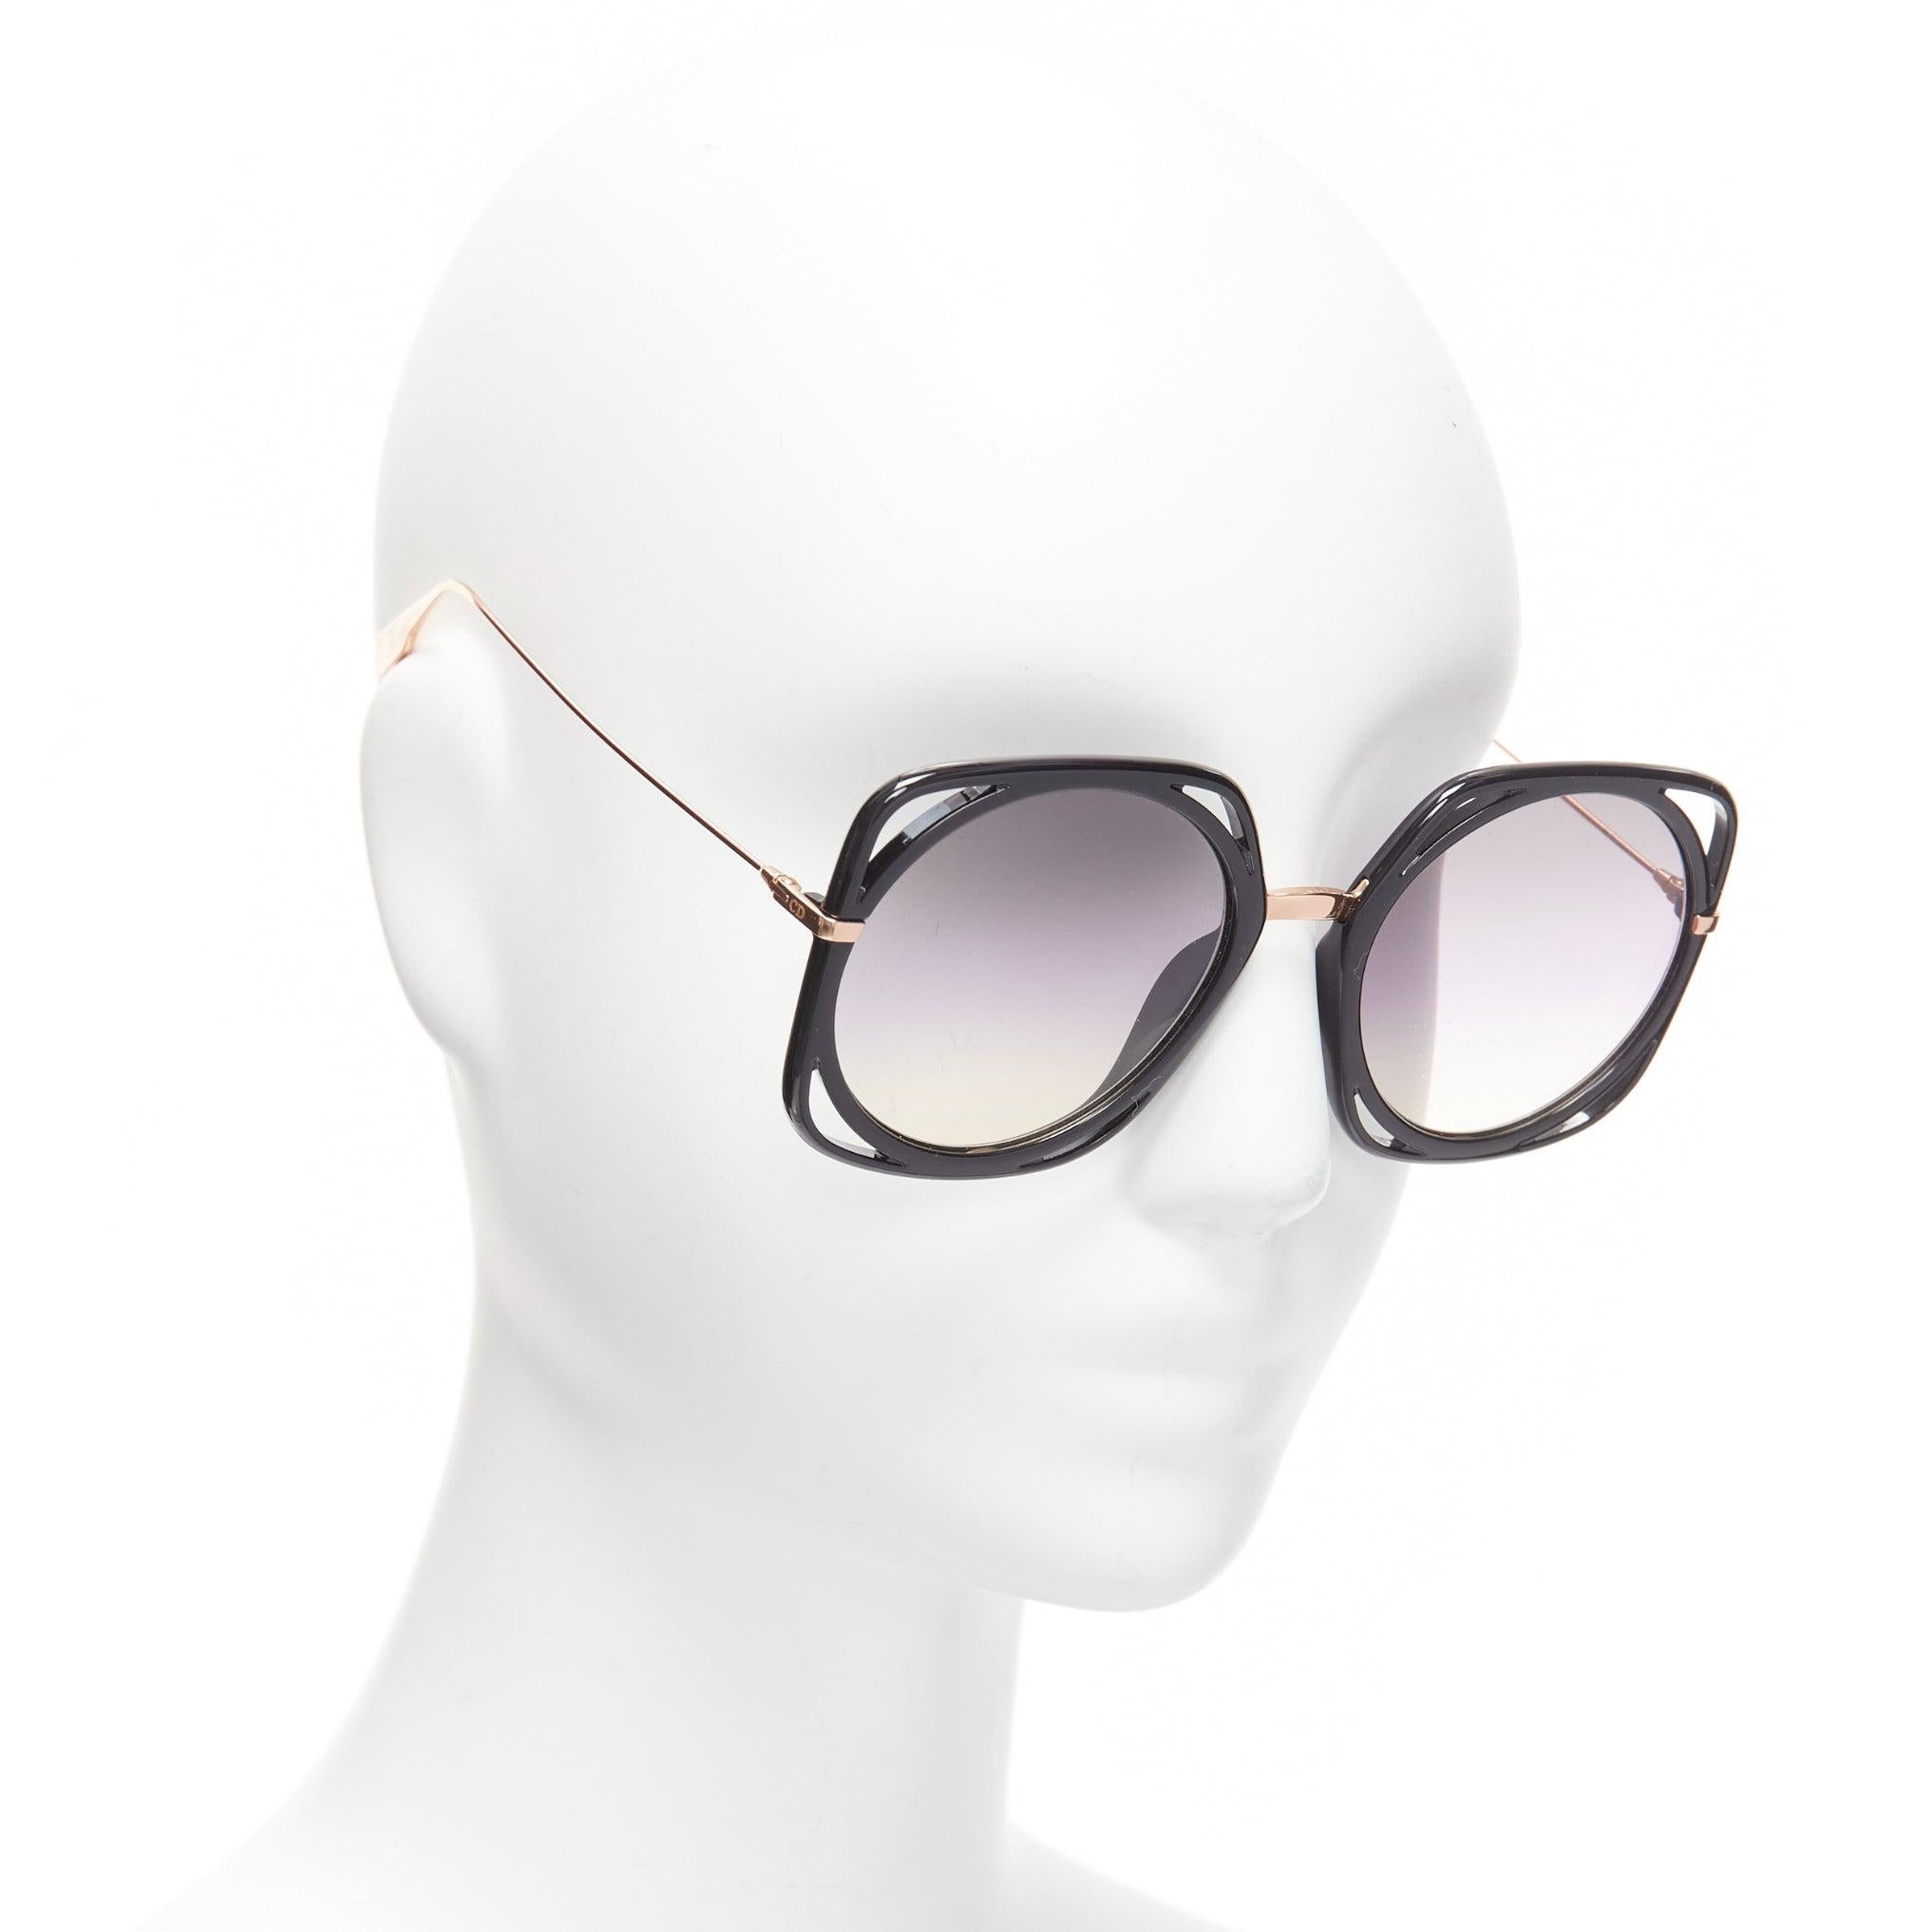 CHRISTIAN DIOR DiorDirection black frame purple lens oversized sunglasses
Reference: NKLL/A00086
Brand: Christian Dior
Model: DiorDirection
Material: Plastic
Color: Black, Purple
Pattern: Solid
Made in: Italy

CONDITION:
Condition: Excellent, this